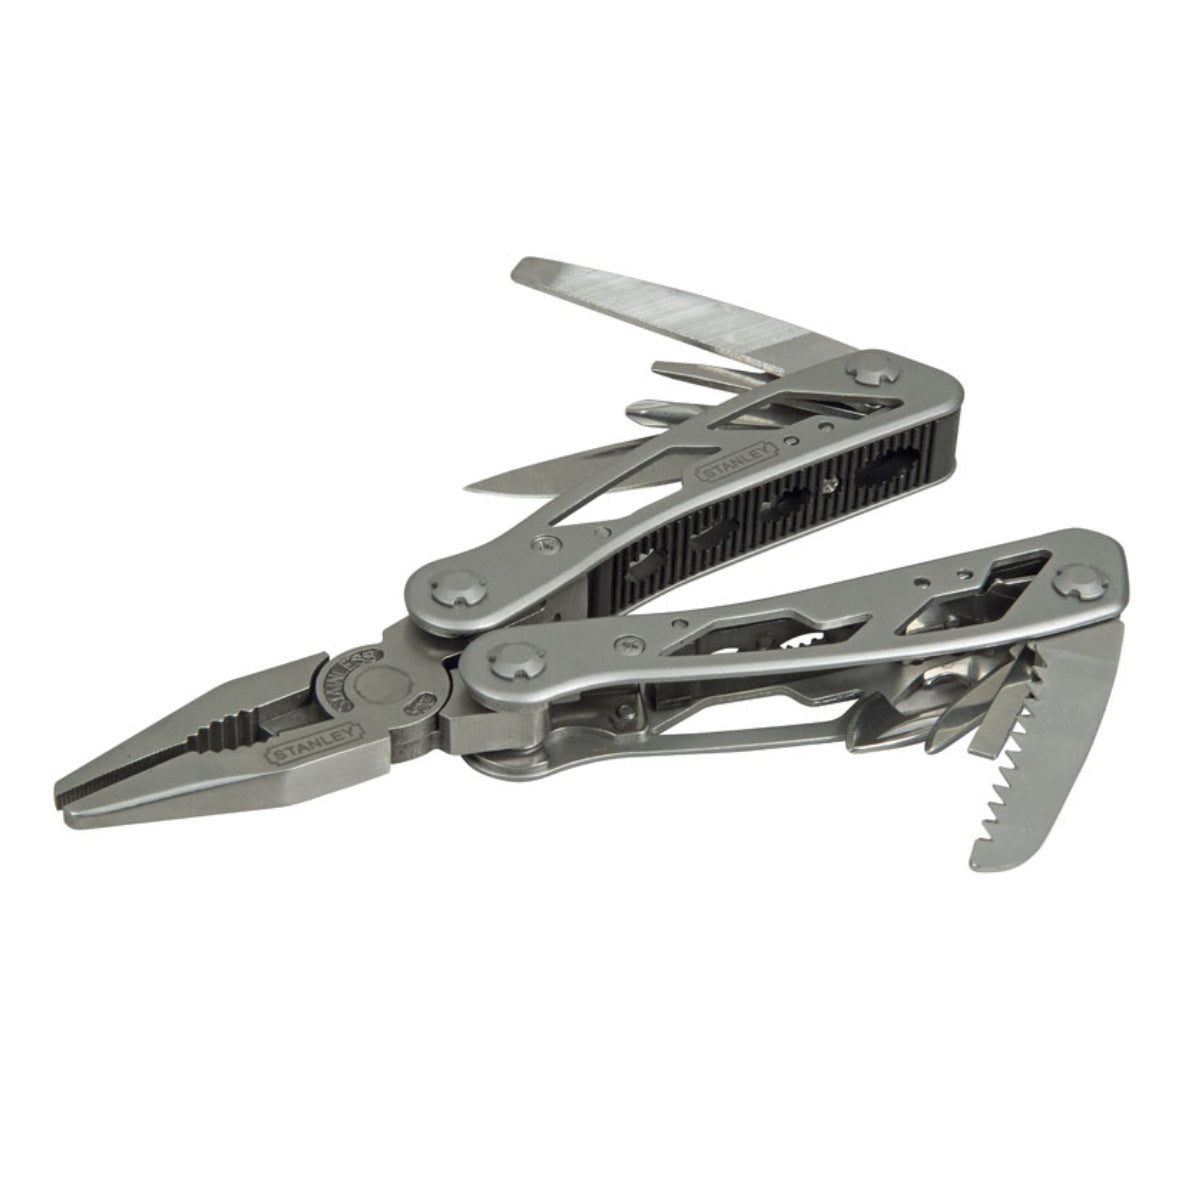 Stanley 12-in1 Multi Tool 0-84-519 Power Tool Services